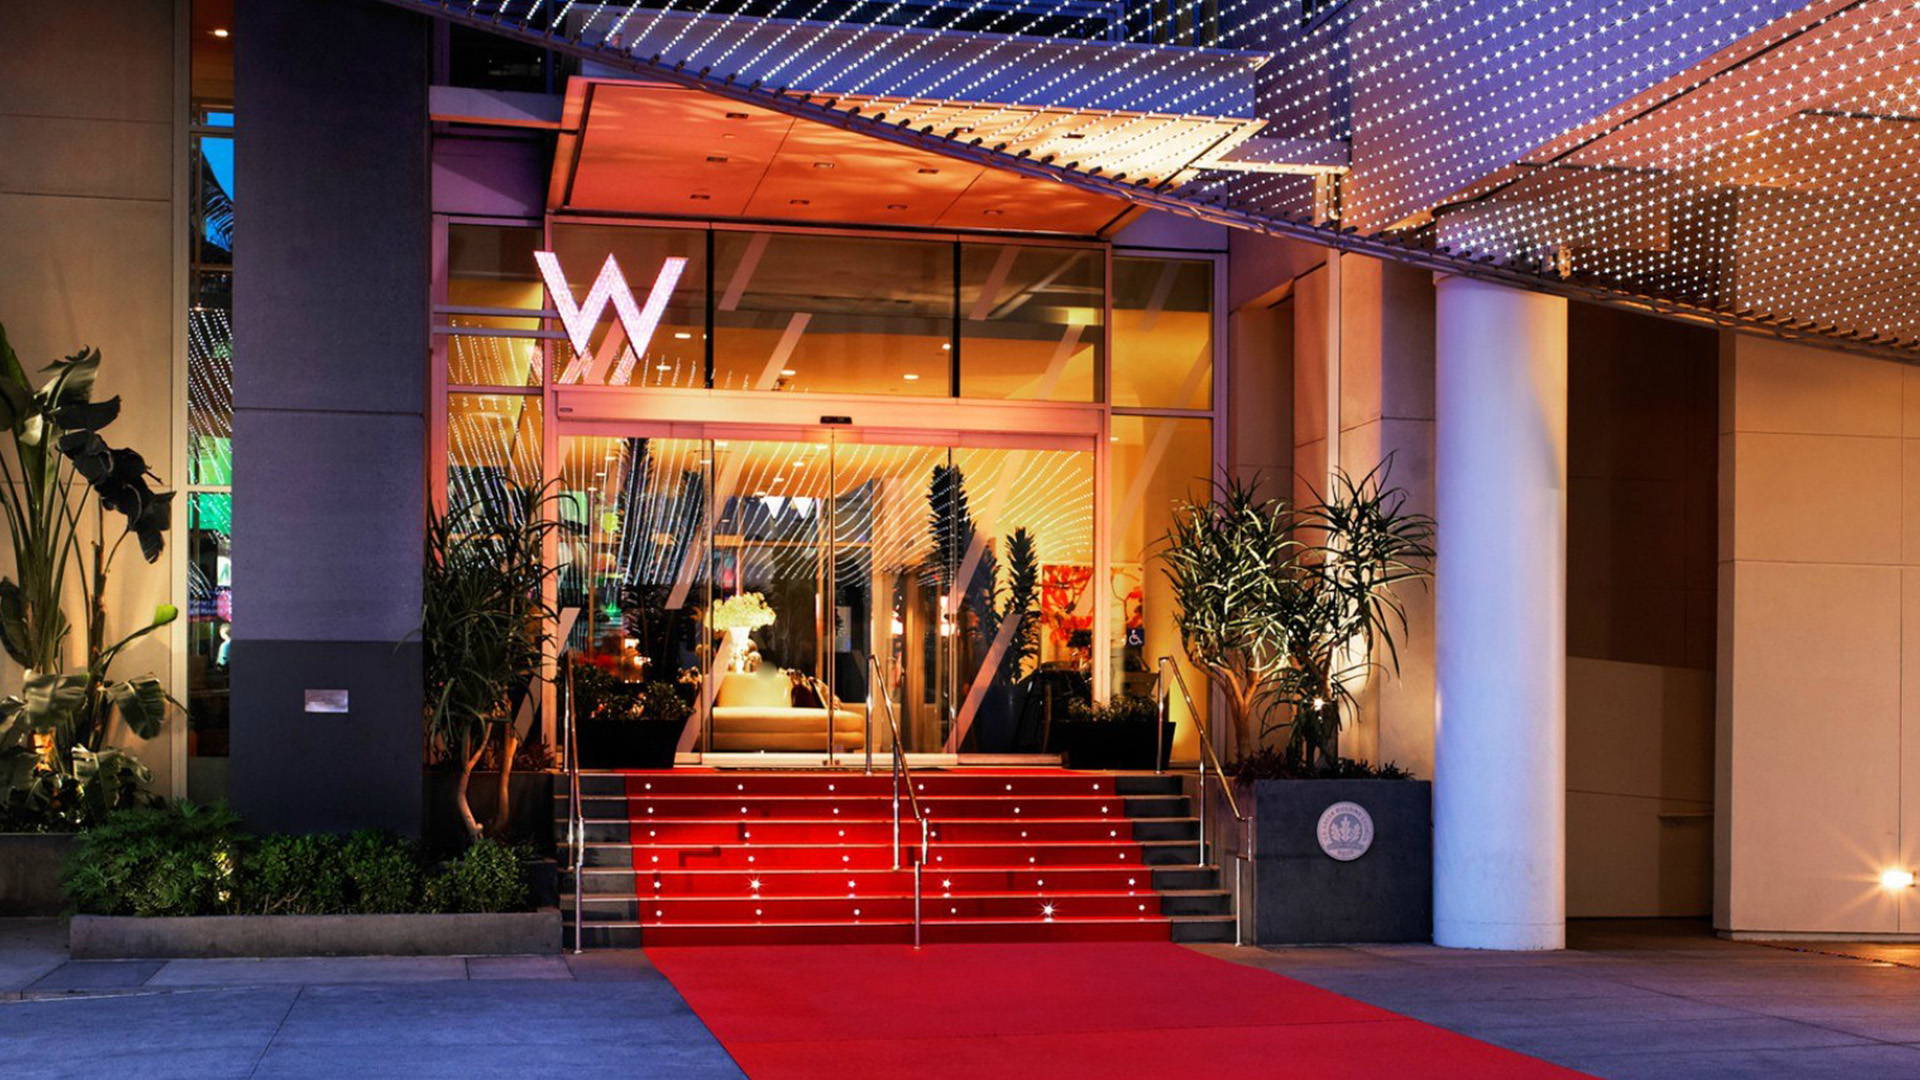 W Hotel, Hollywood (Option 1, Featured)